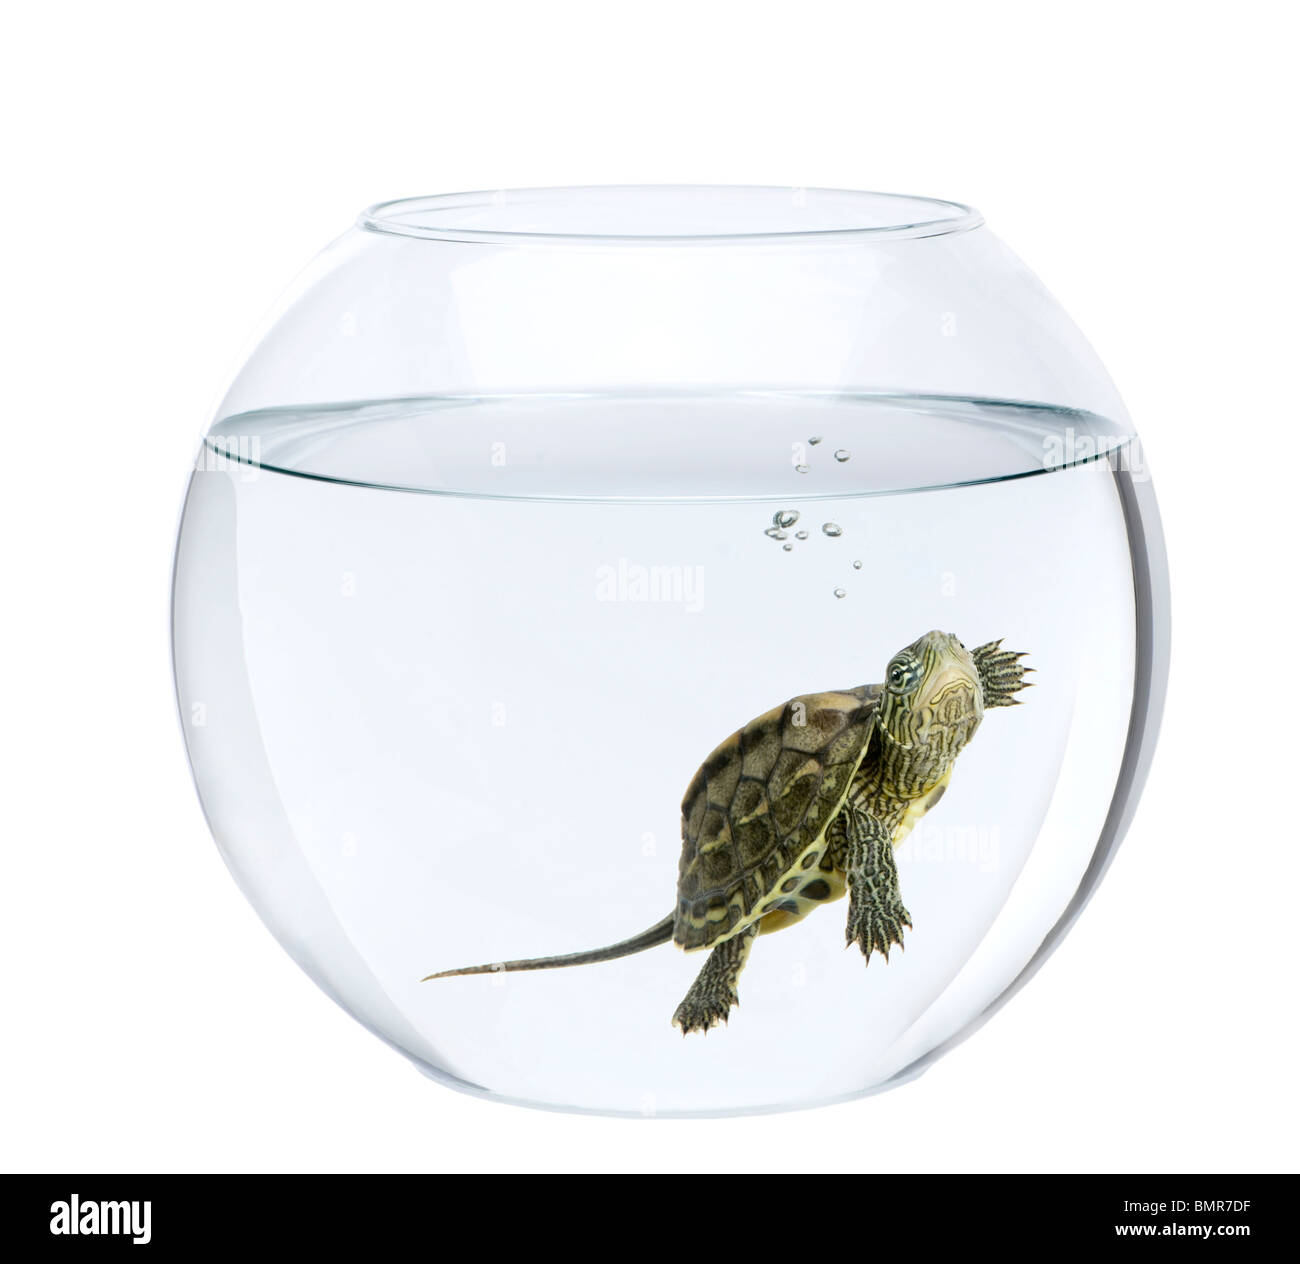 Small turtle swimming in fish bowl, in front of white background Stock Photo